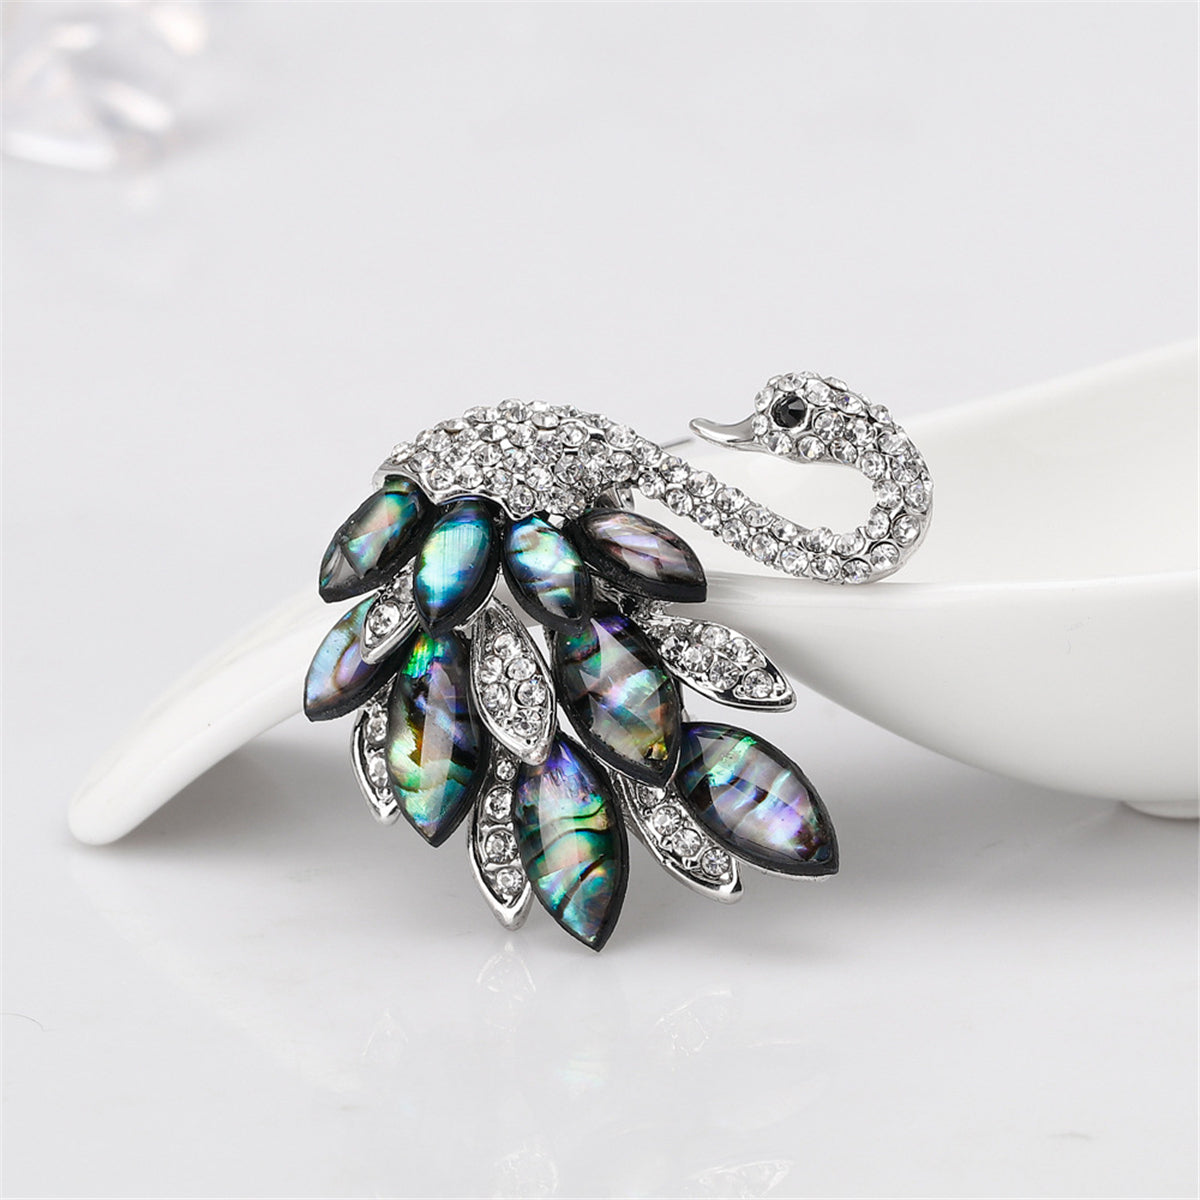 Abalone Shell & Cubic Zirconia Silver-Plated Swan Brooch